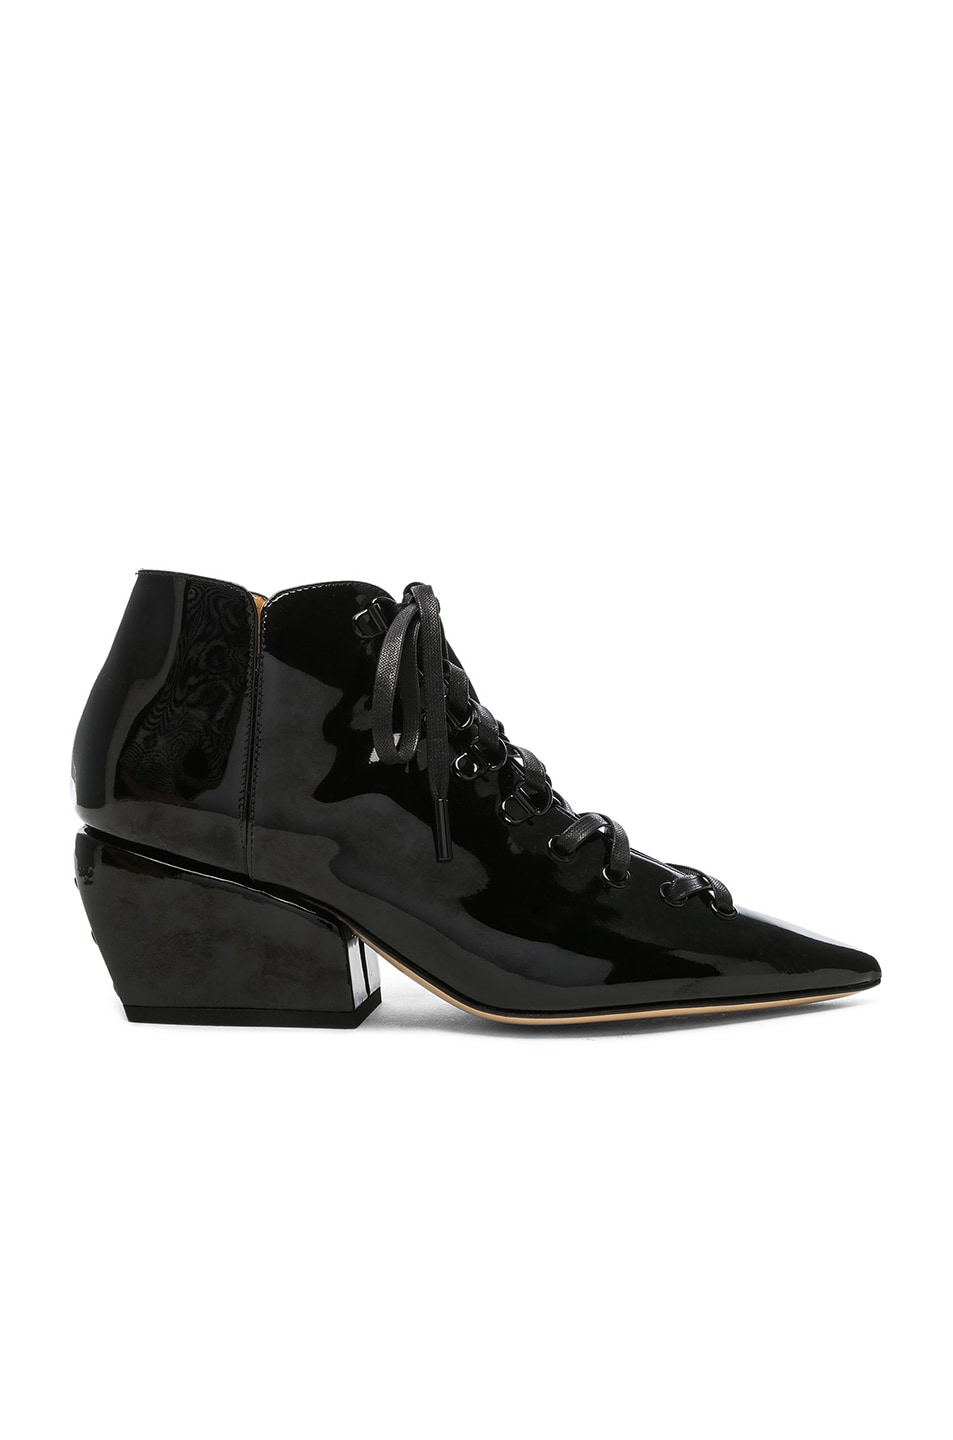 Image 1 of Petar Petrov Patent Leather Sacha Ankle Boots in Black Patent & Black